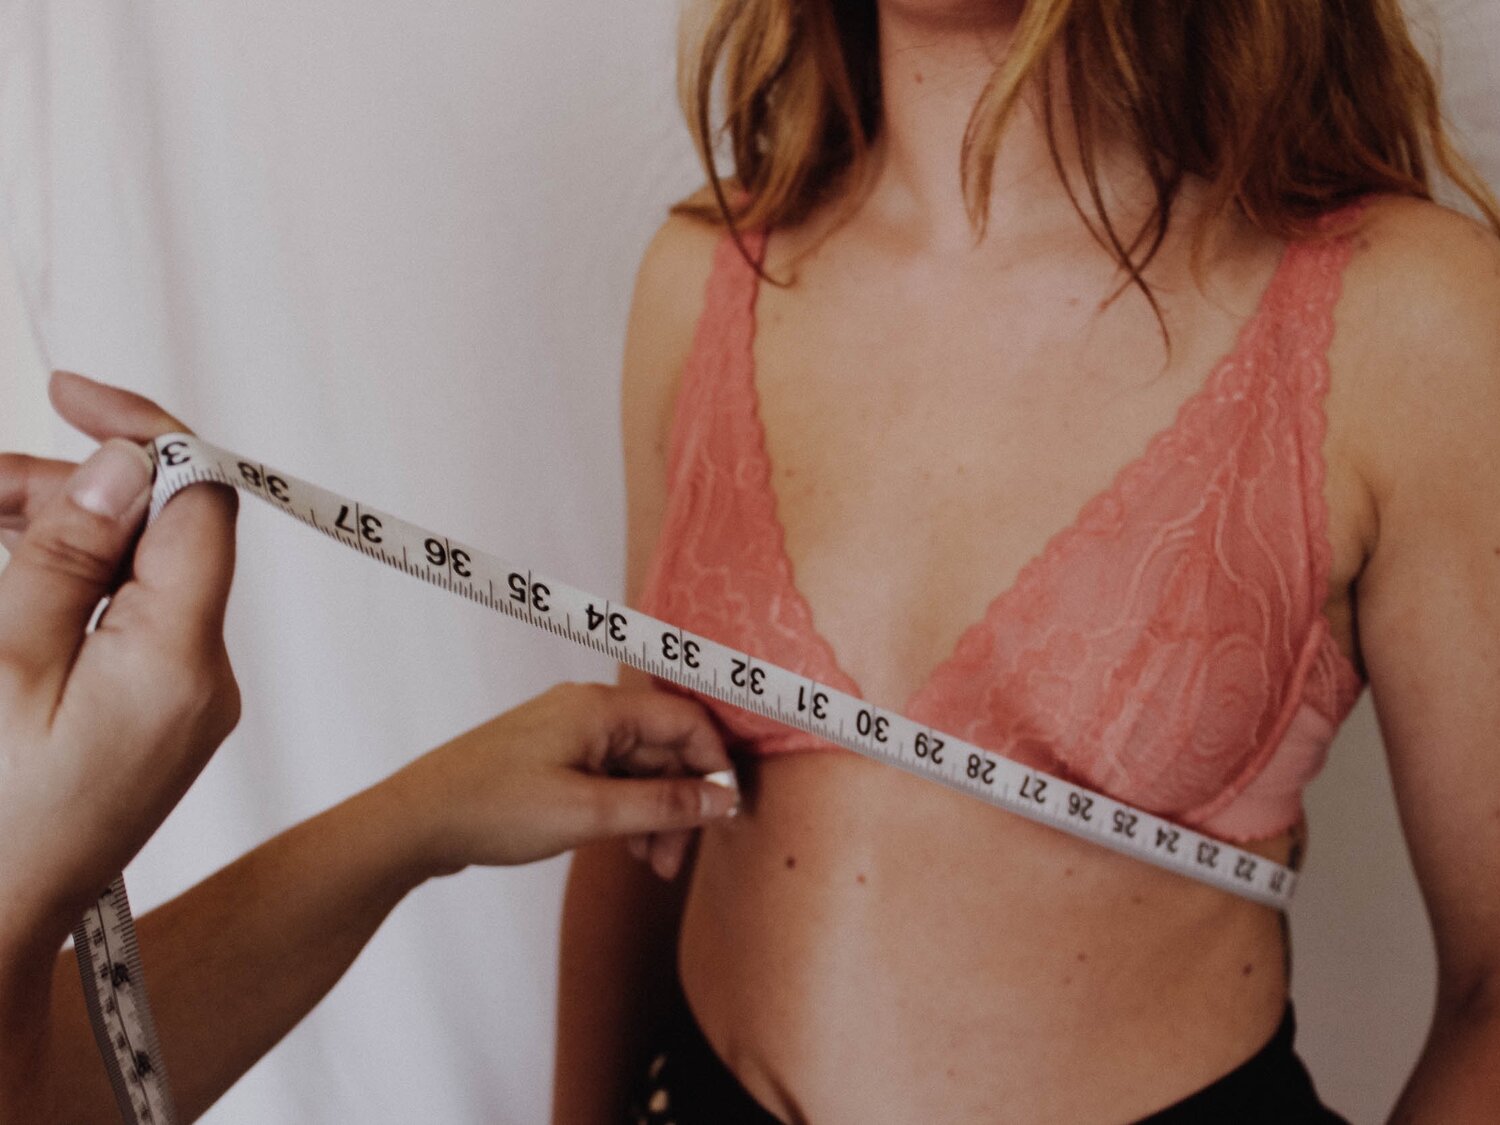 Bra Problems - Learn How to Fix Bra Fitting Problems